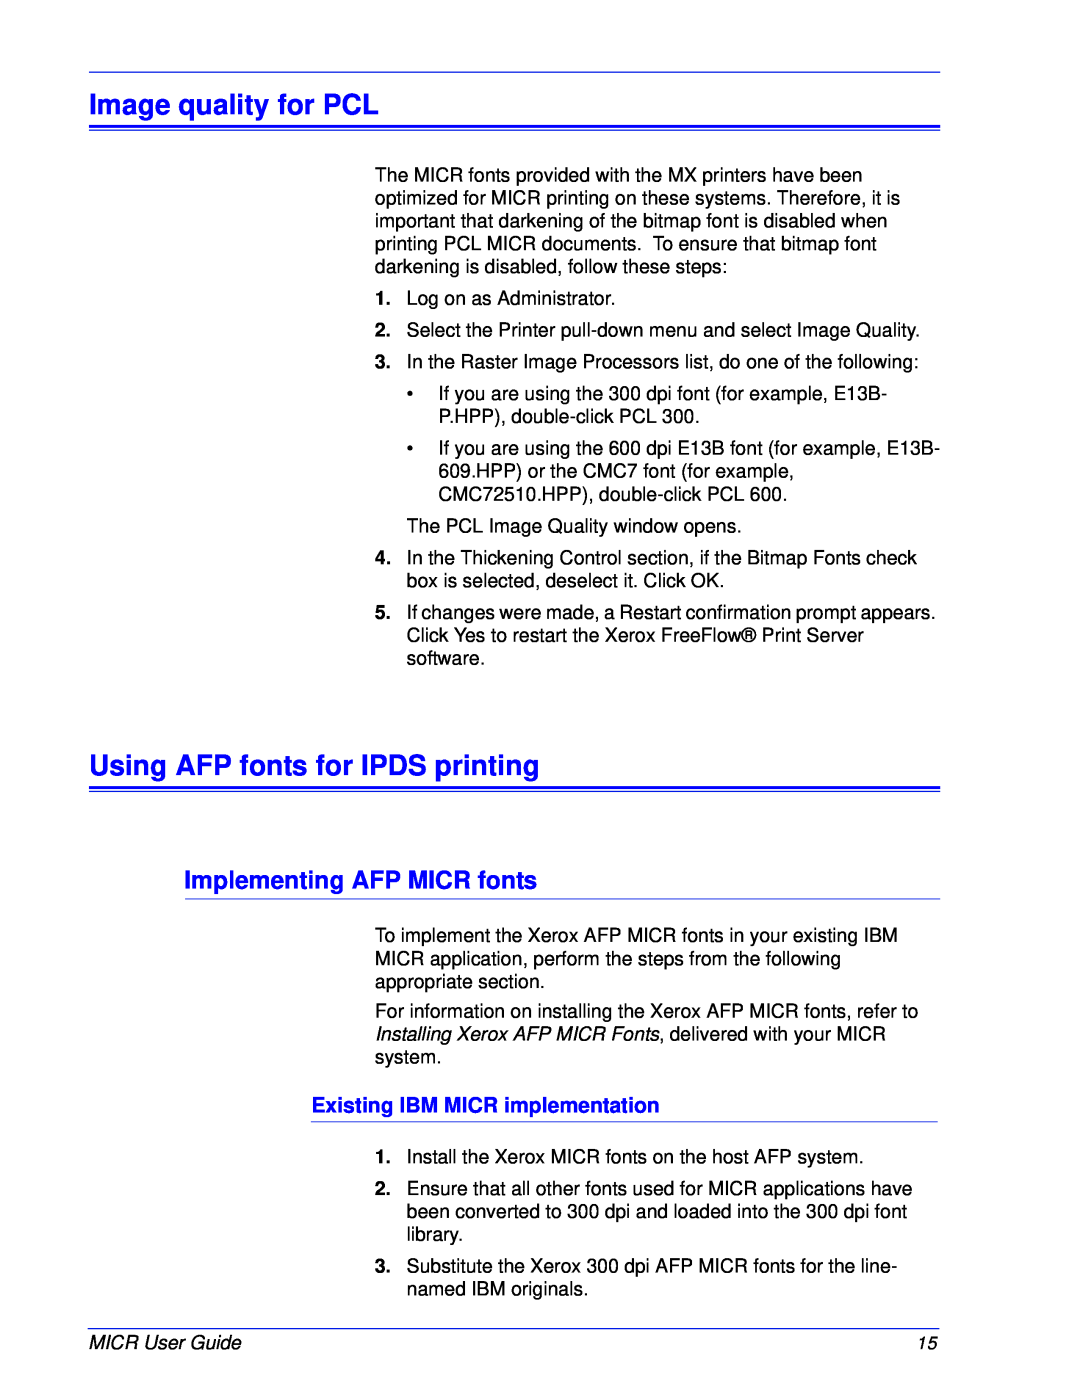 Xerox 701P47409 manual Image quality for PCL, Using AFP fonts for IPDS printing, Implementing AFP MICR fonts 